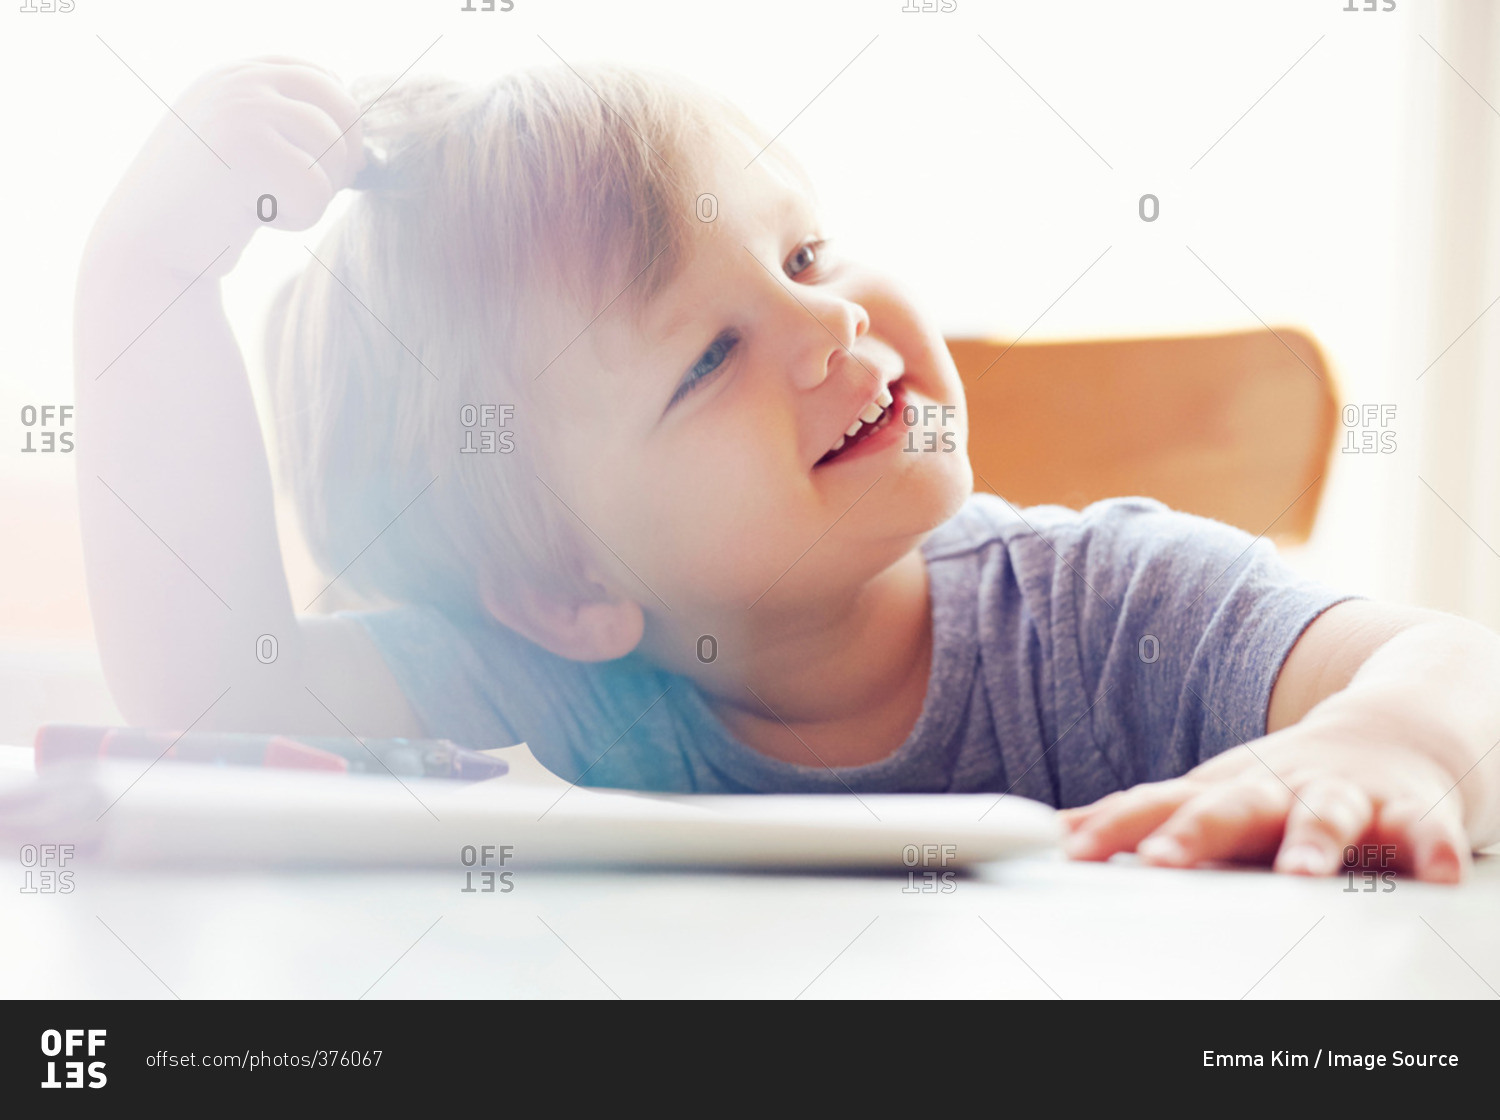 Boy sitting at table scratching head, looking away smiling